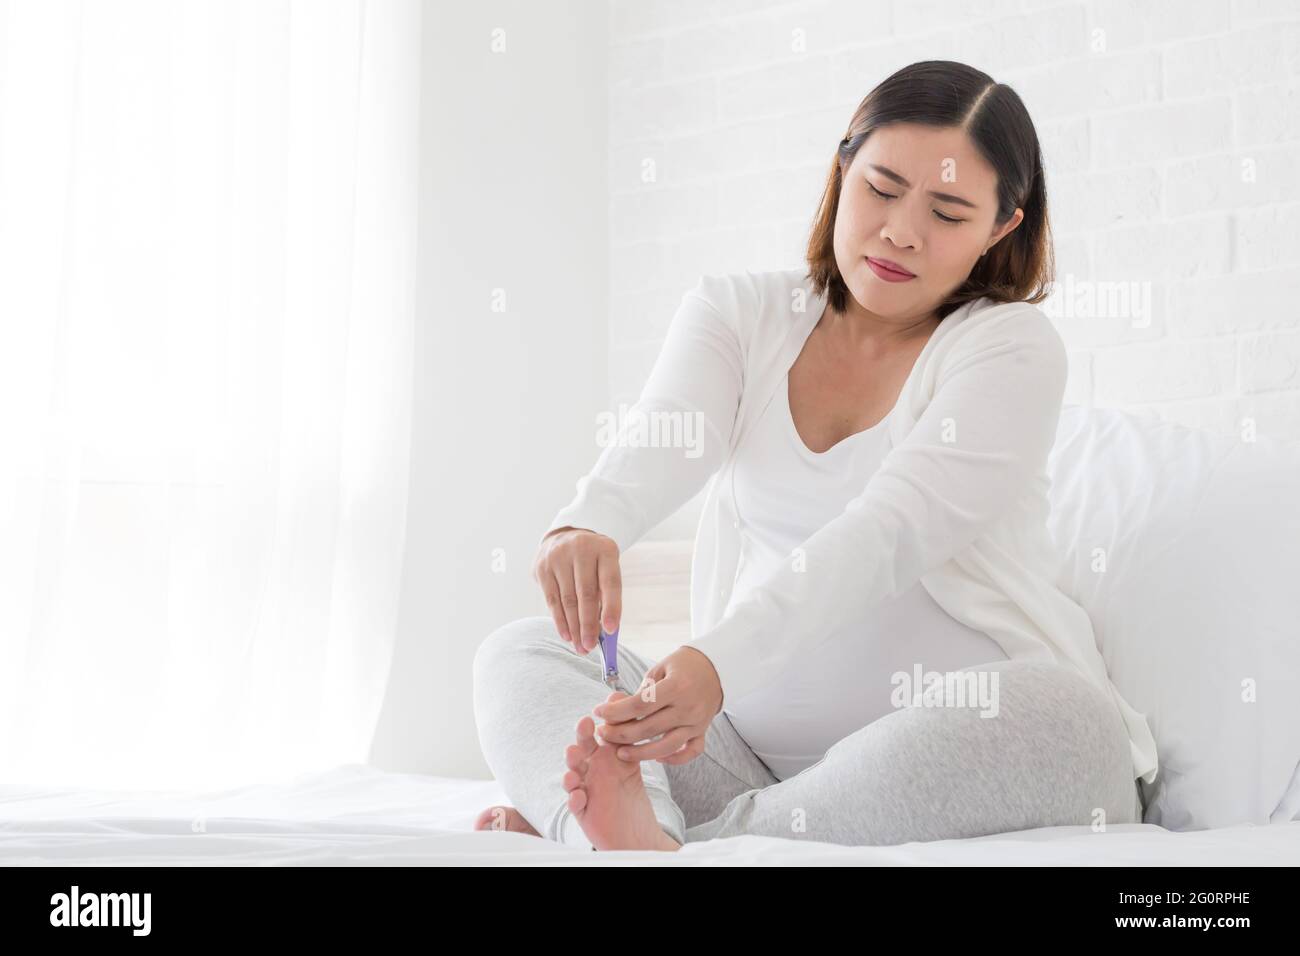 Effective Treatment For Athlete's Foot And Fungal Nails